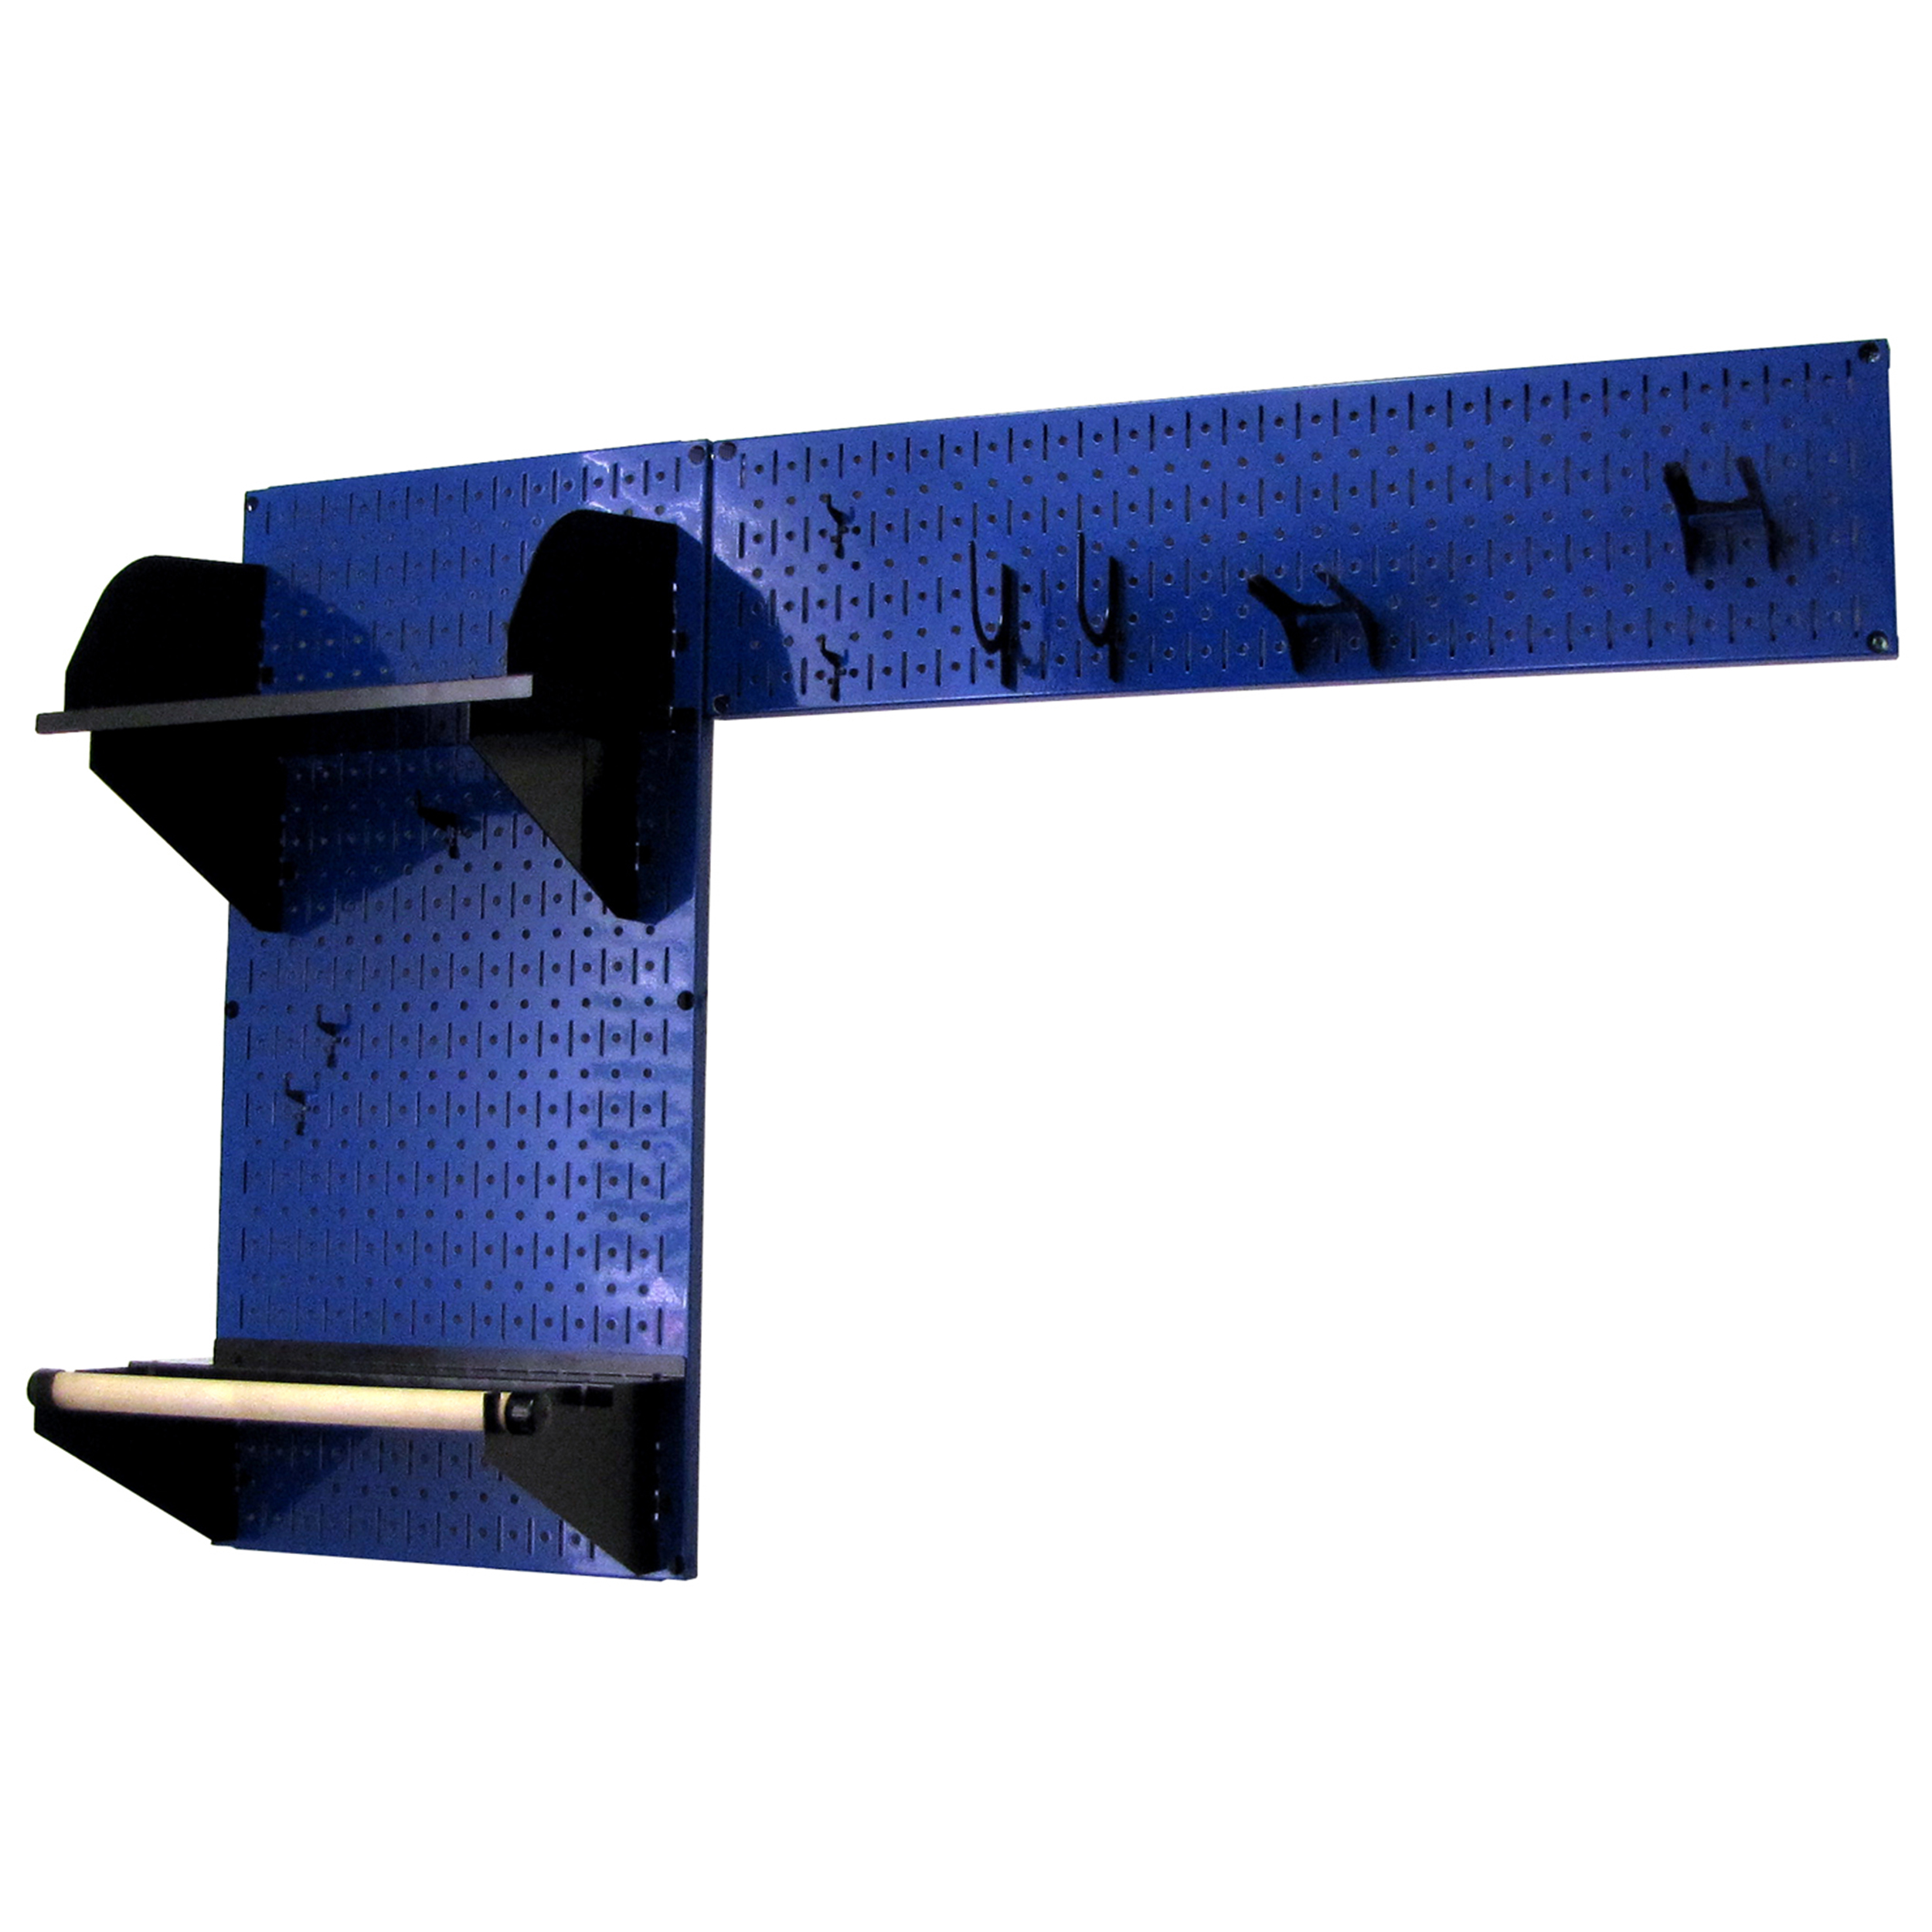 Pegboard Garden Tool Board Organizer With Blue Pegboard And Black Accessories